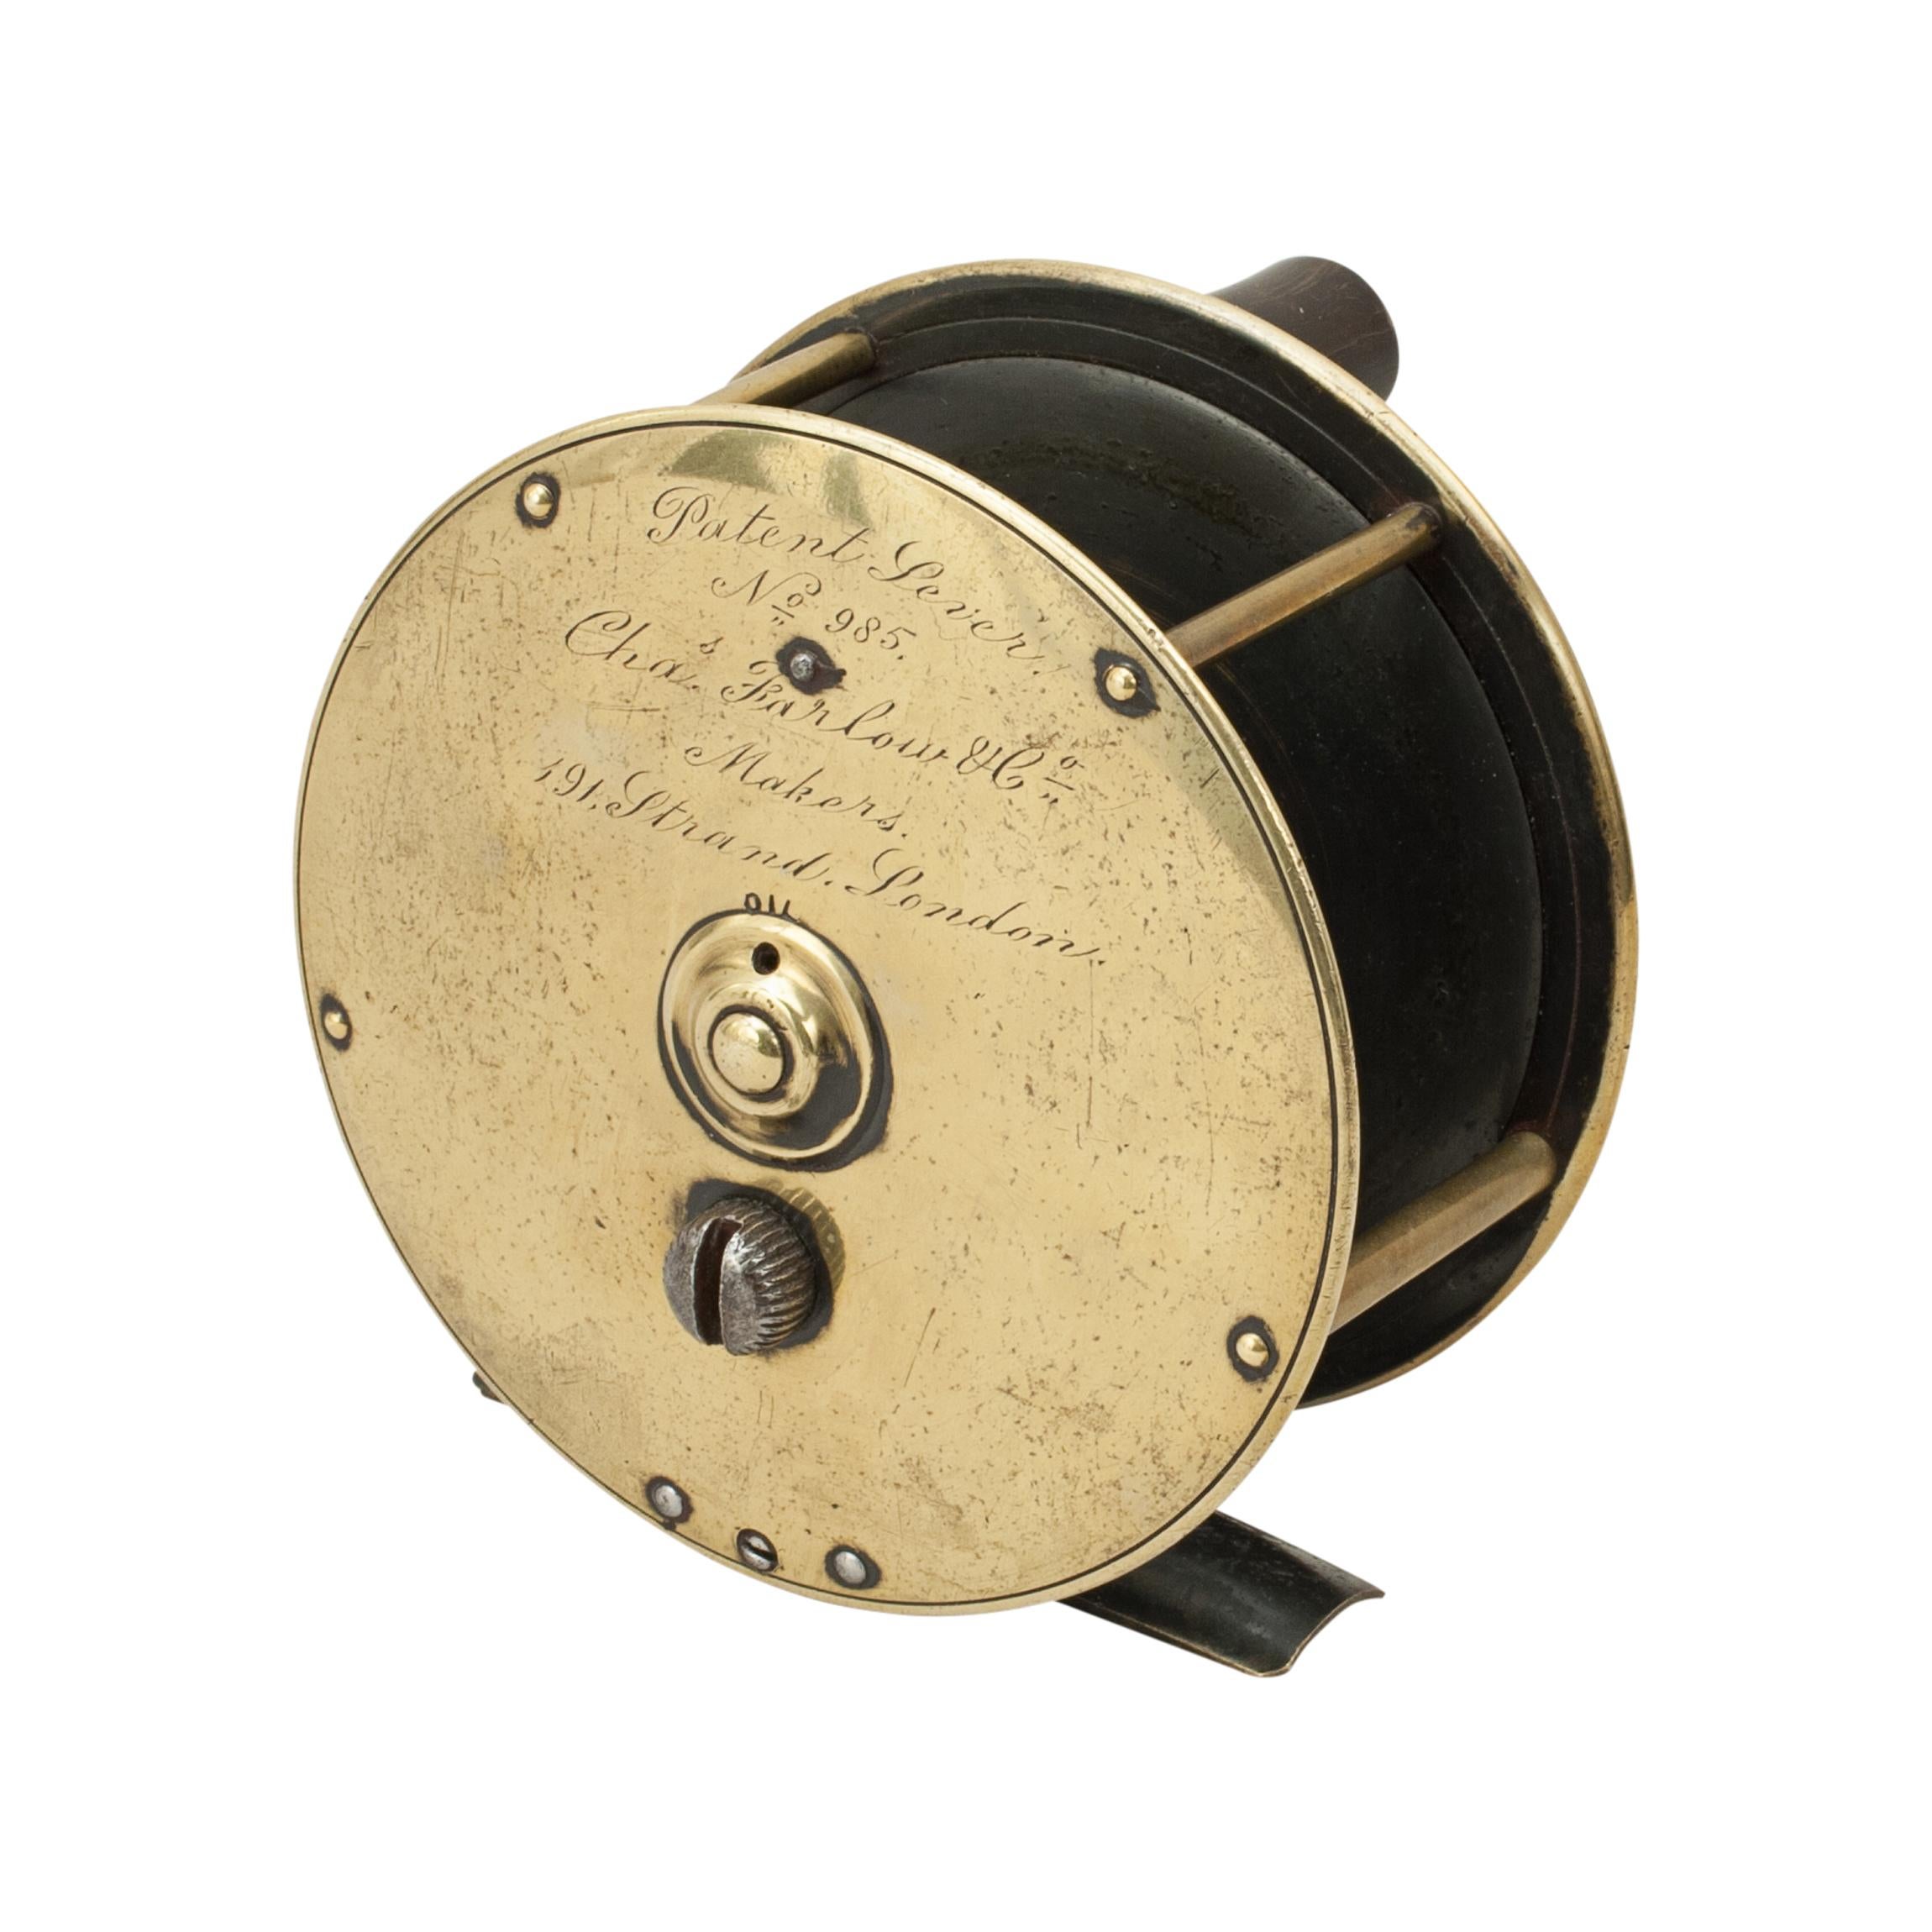 Salmon fishing reel by Farlows.
A very good 4 ¼ inch brass salmon fishing reel by Farlow, London. The reel with brass foot, check, rear tension adjuster and a single horn handle. The back plate engraved 'Patent Lever No. 985, Chas. Farlow & Co.,